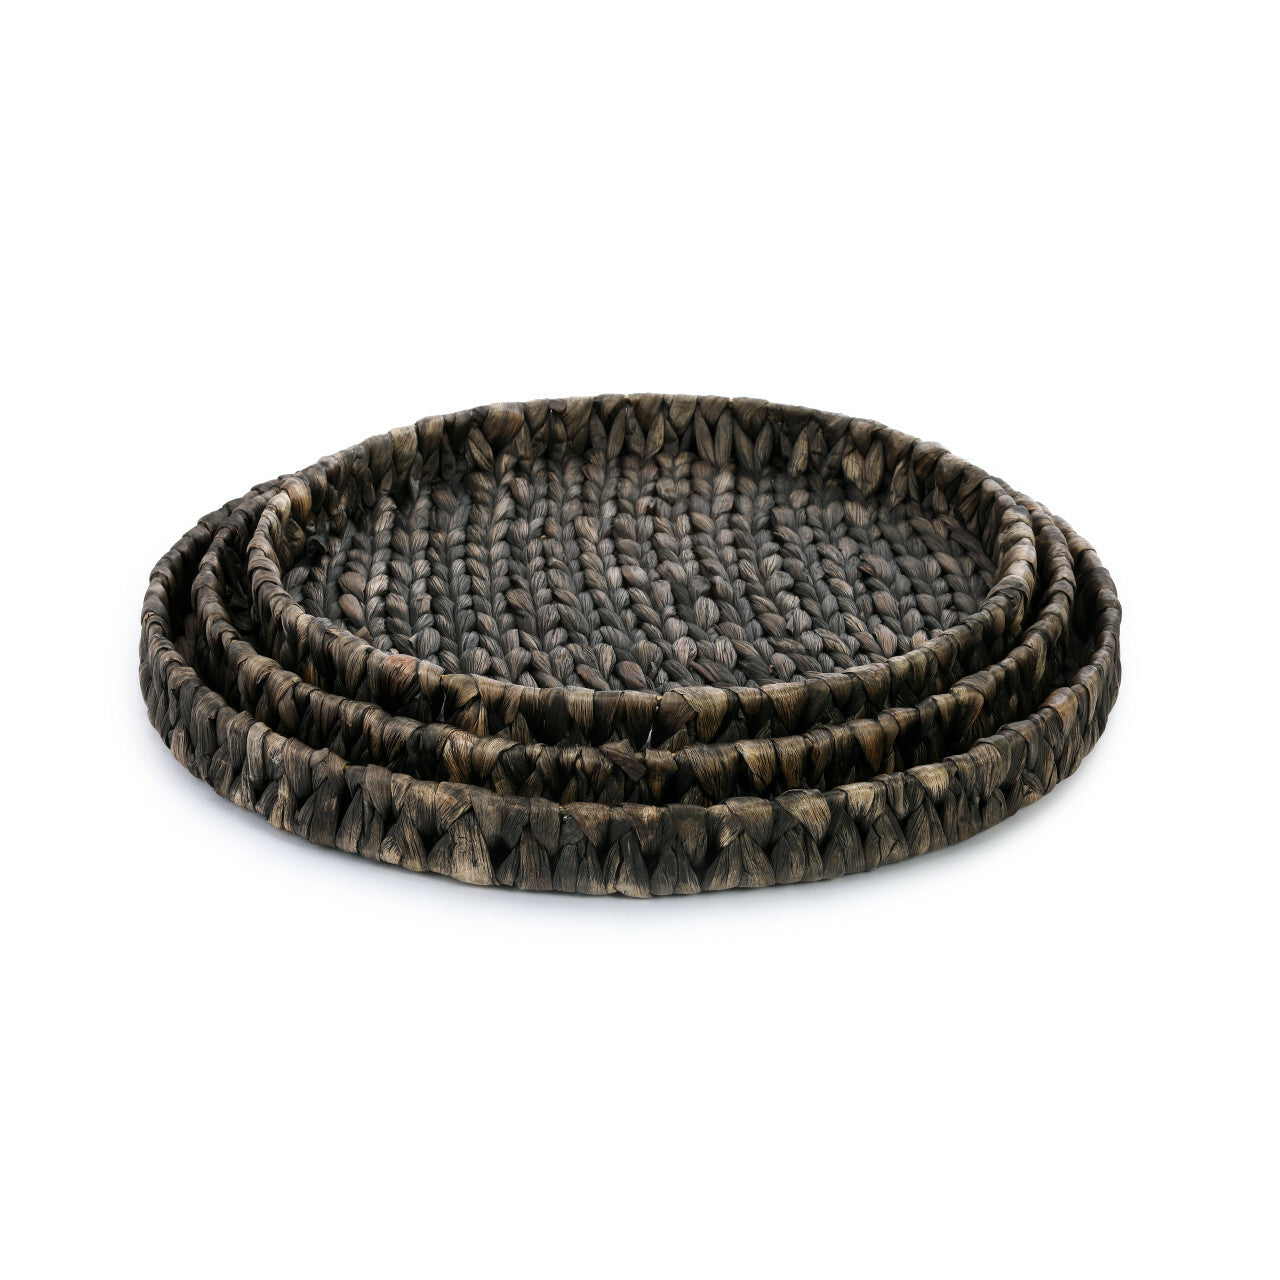 Braided Tray Baskets - Set of 3 Grass Varying Sizes